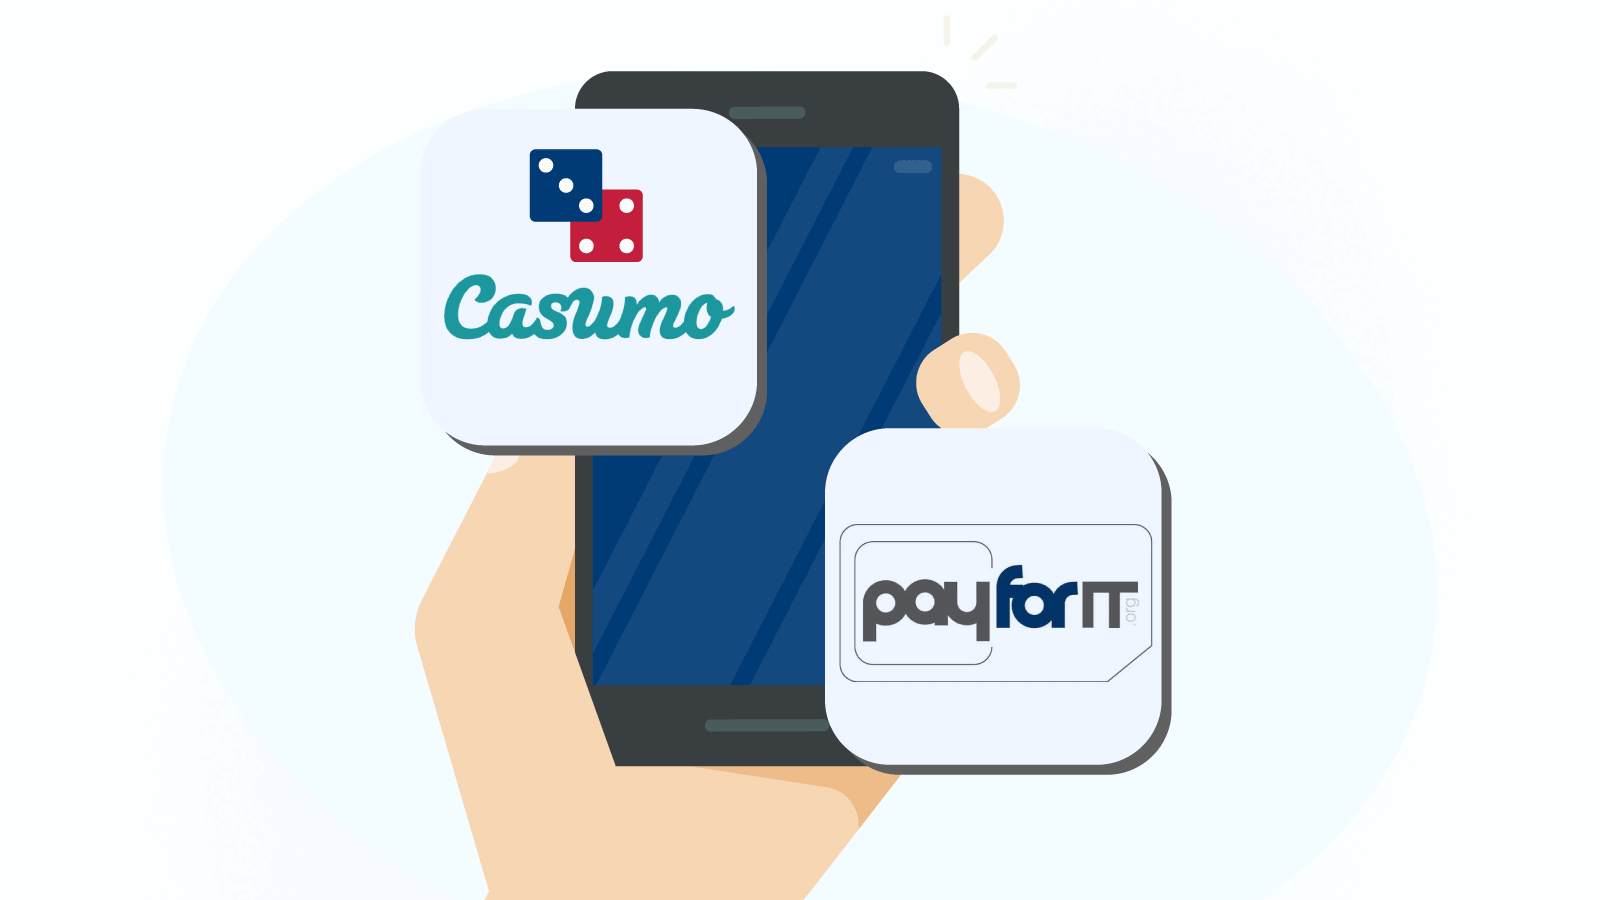 Casumo – Best Mobile Casino With Payforit